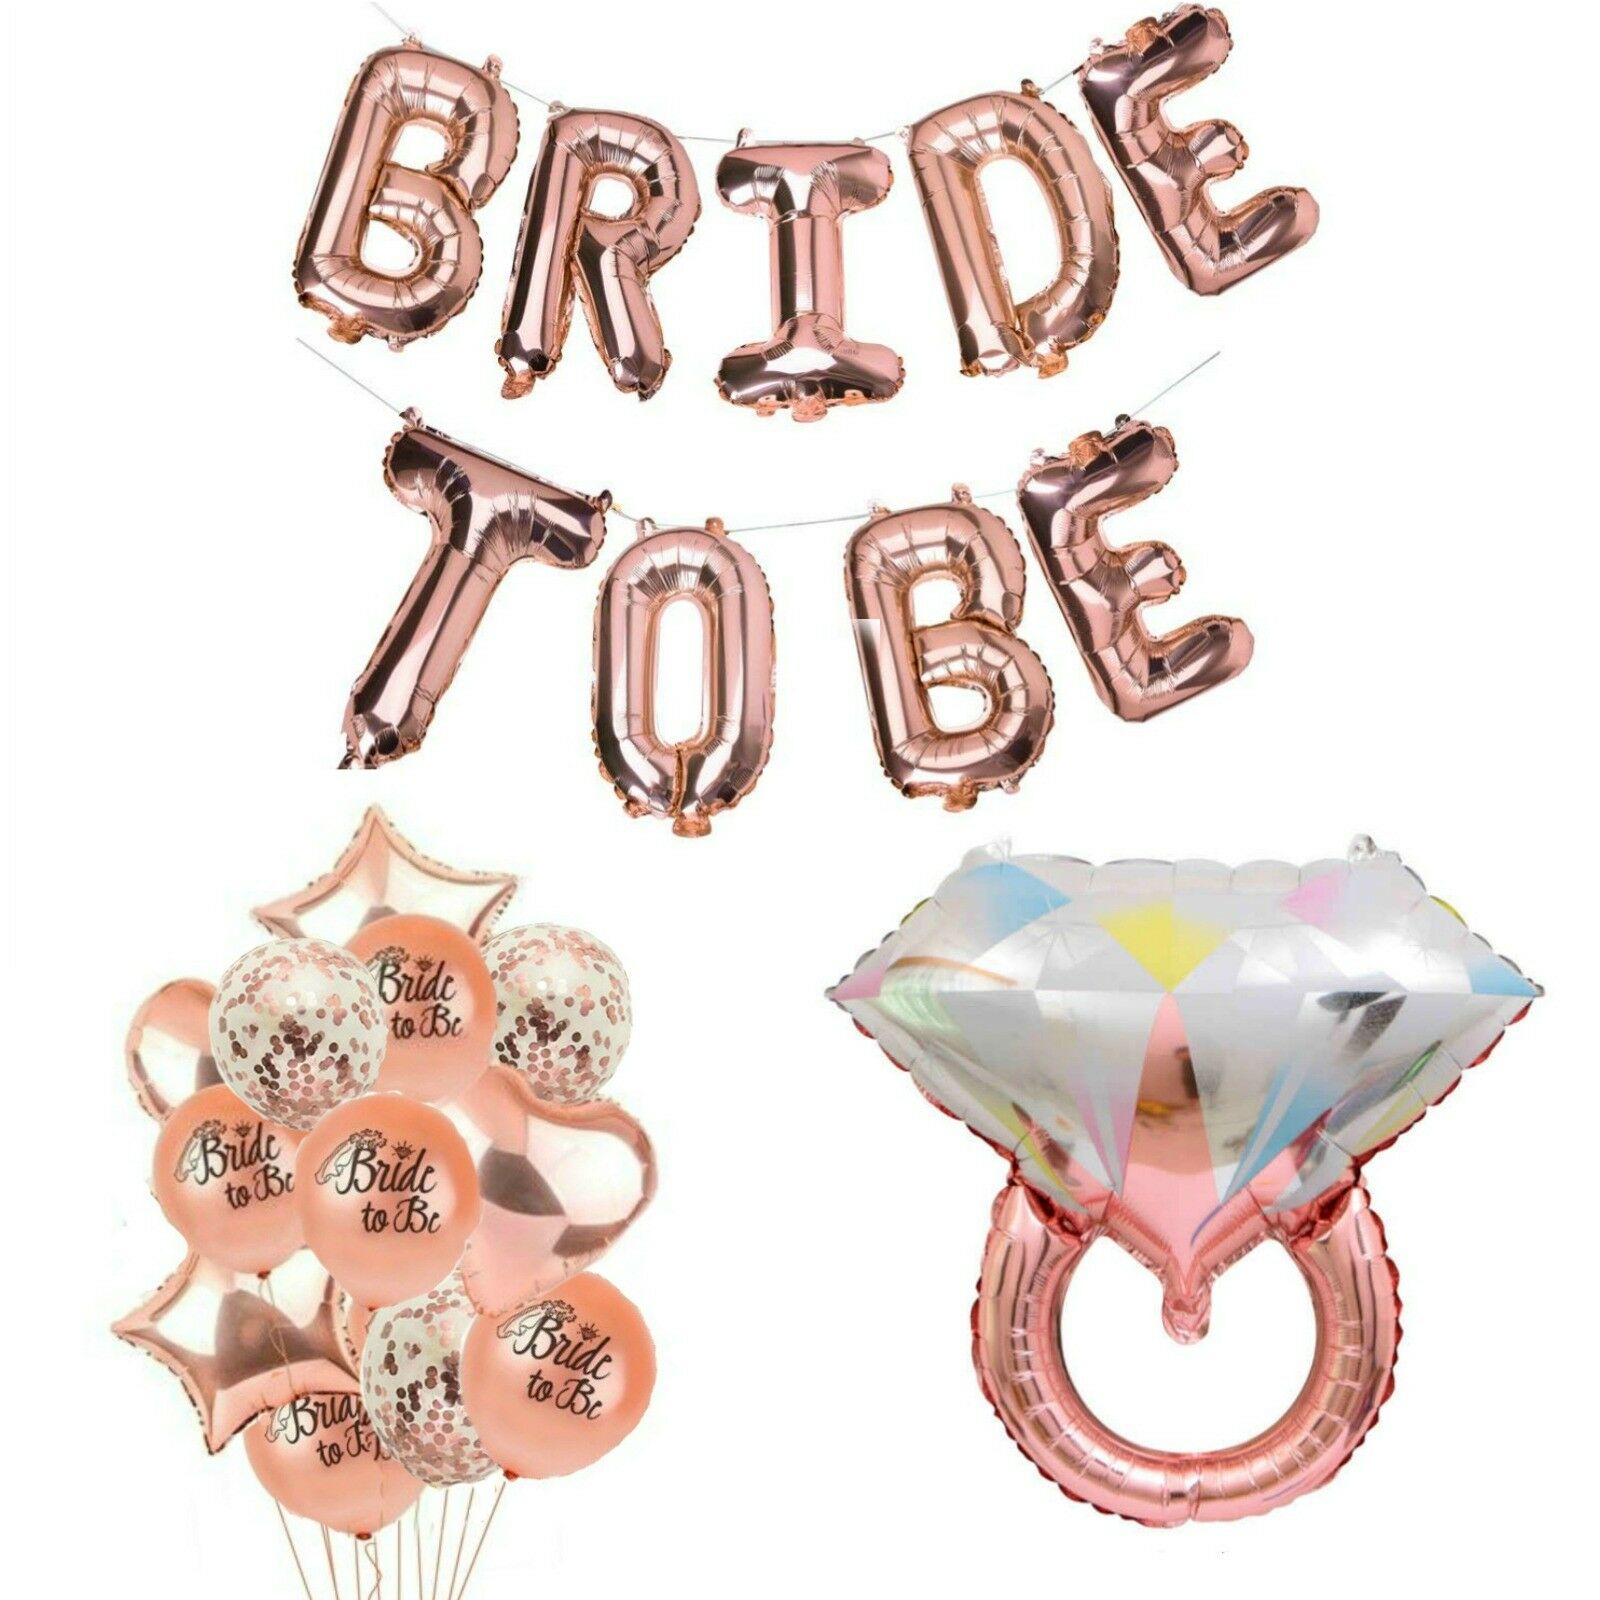 Rose Gold Bridal Shower Decorations, Bride to Be Banner, Engagement Ring Balloon